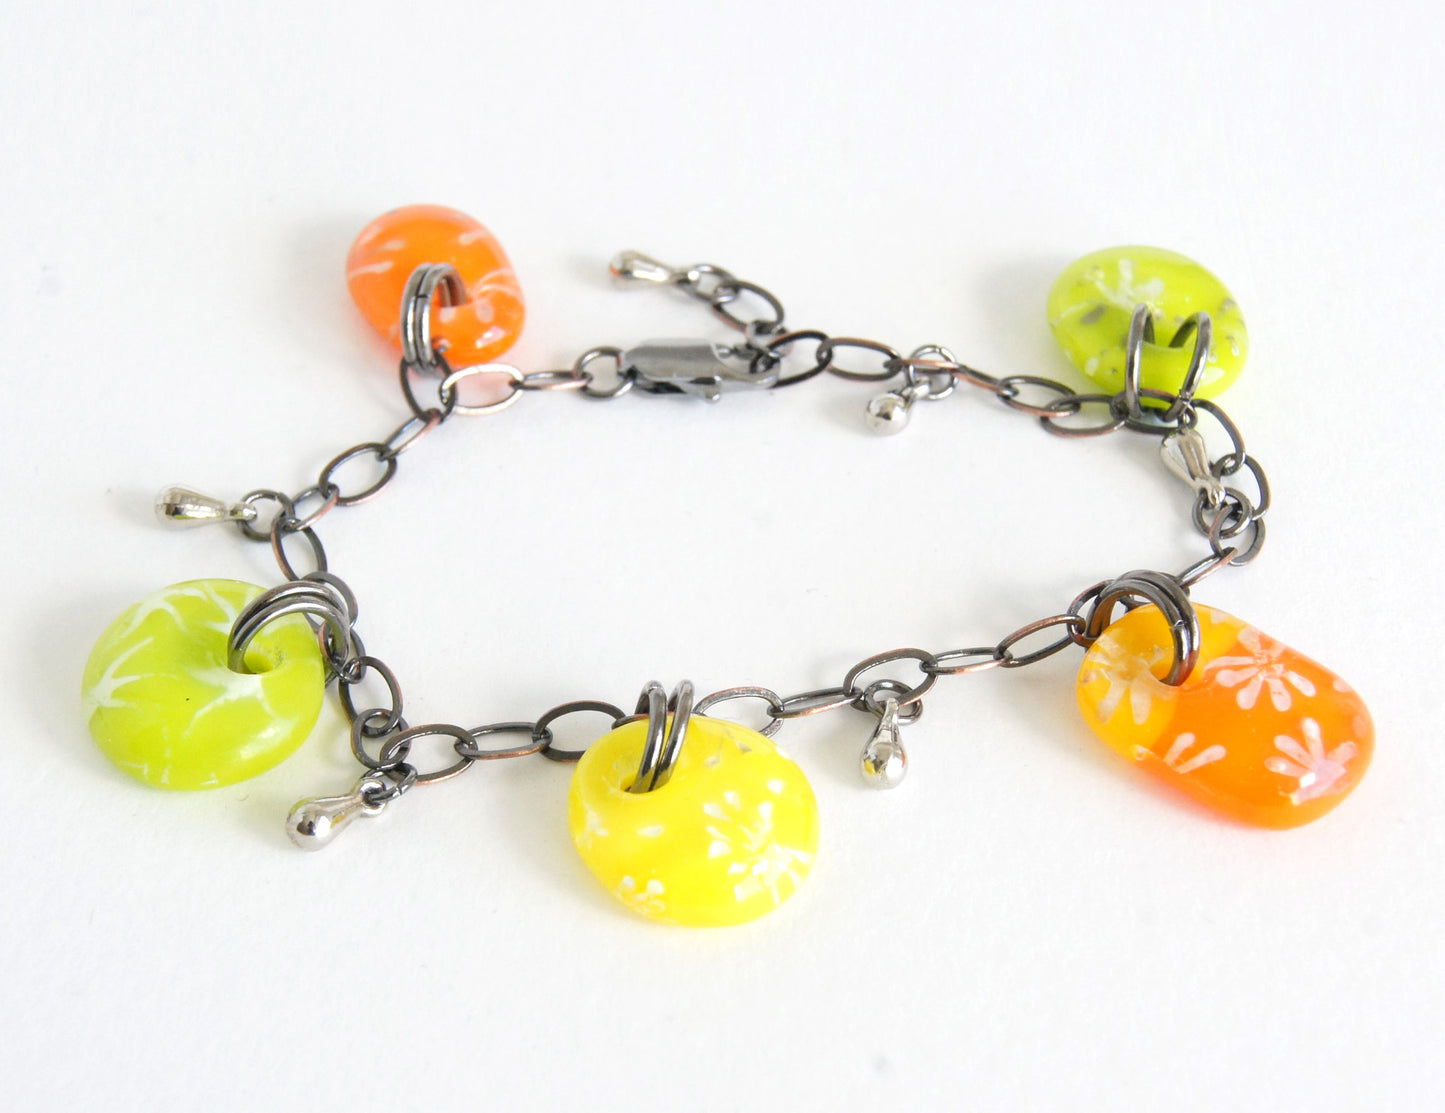 Colorful kiln fired glass drop bracelet with silver stars and flower designs